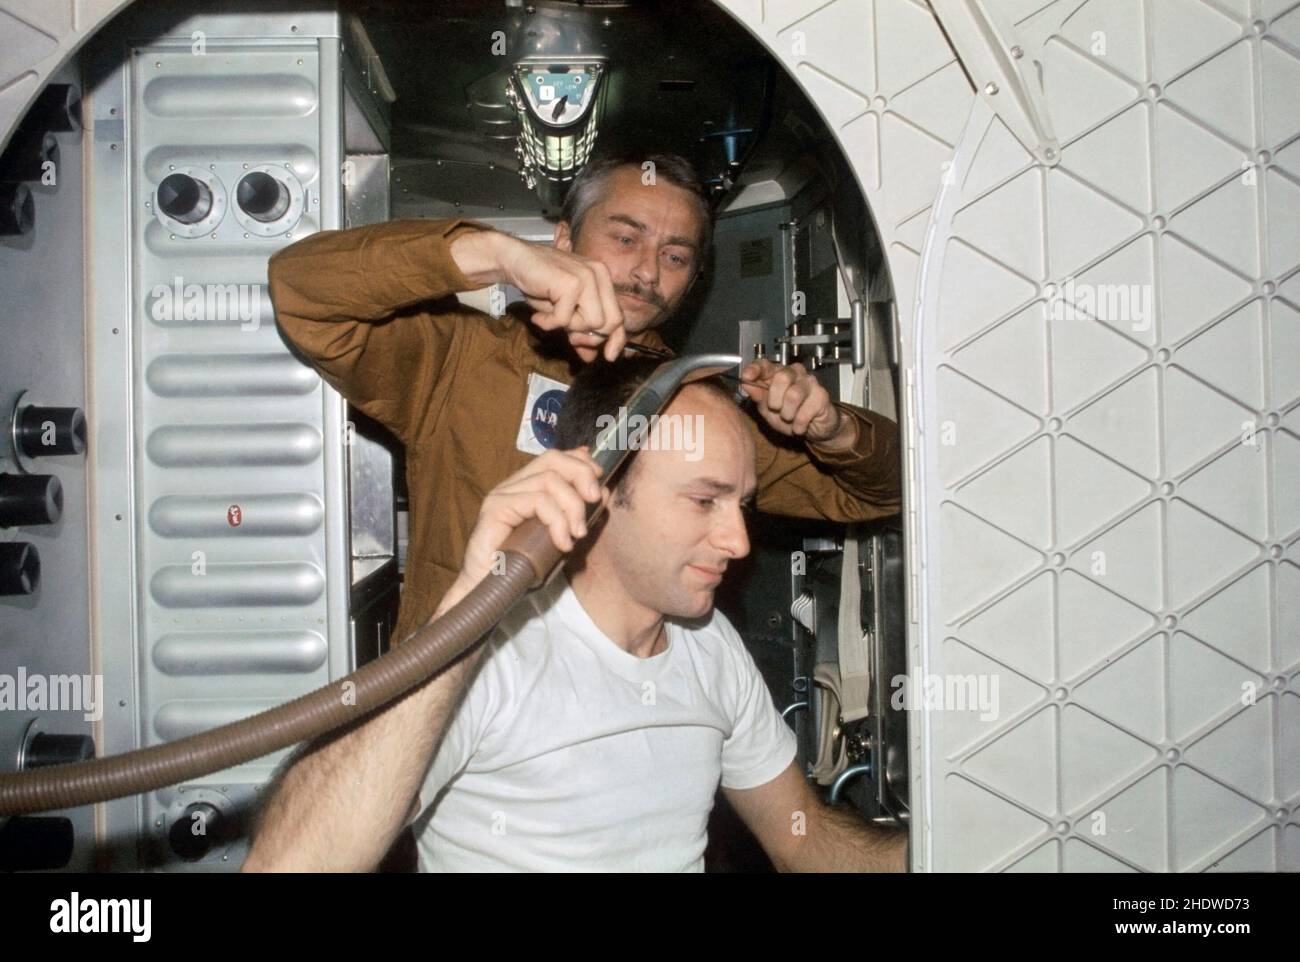 (19 Aug. 1973) --- Scientist-astronaut Owen K. Garriott, Skylab 3 science pilot, trims the hair of astronaut Alan L. Bean, commander, in this onboard photograph from the Skylab Orbital Workshop (OWS) in Earth orbit. Astronaut Jack R. Lousma, pilot, took this picture with a 35mm Nikon camera. Bean holds a vacuum hose to gather in loose hair. The crew of the second manned Skylab flight went on to successfully complete 59 days aboard the Skylab space station cluster in Earth orbit Stock Photo